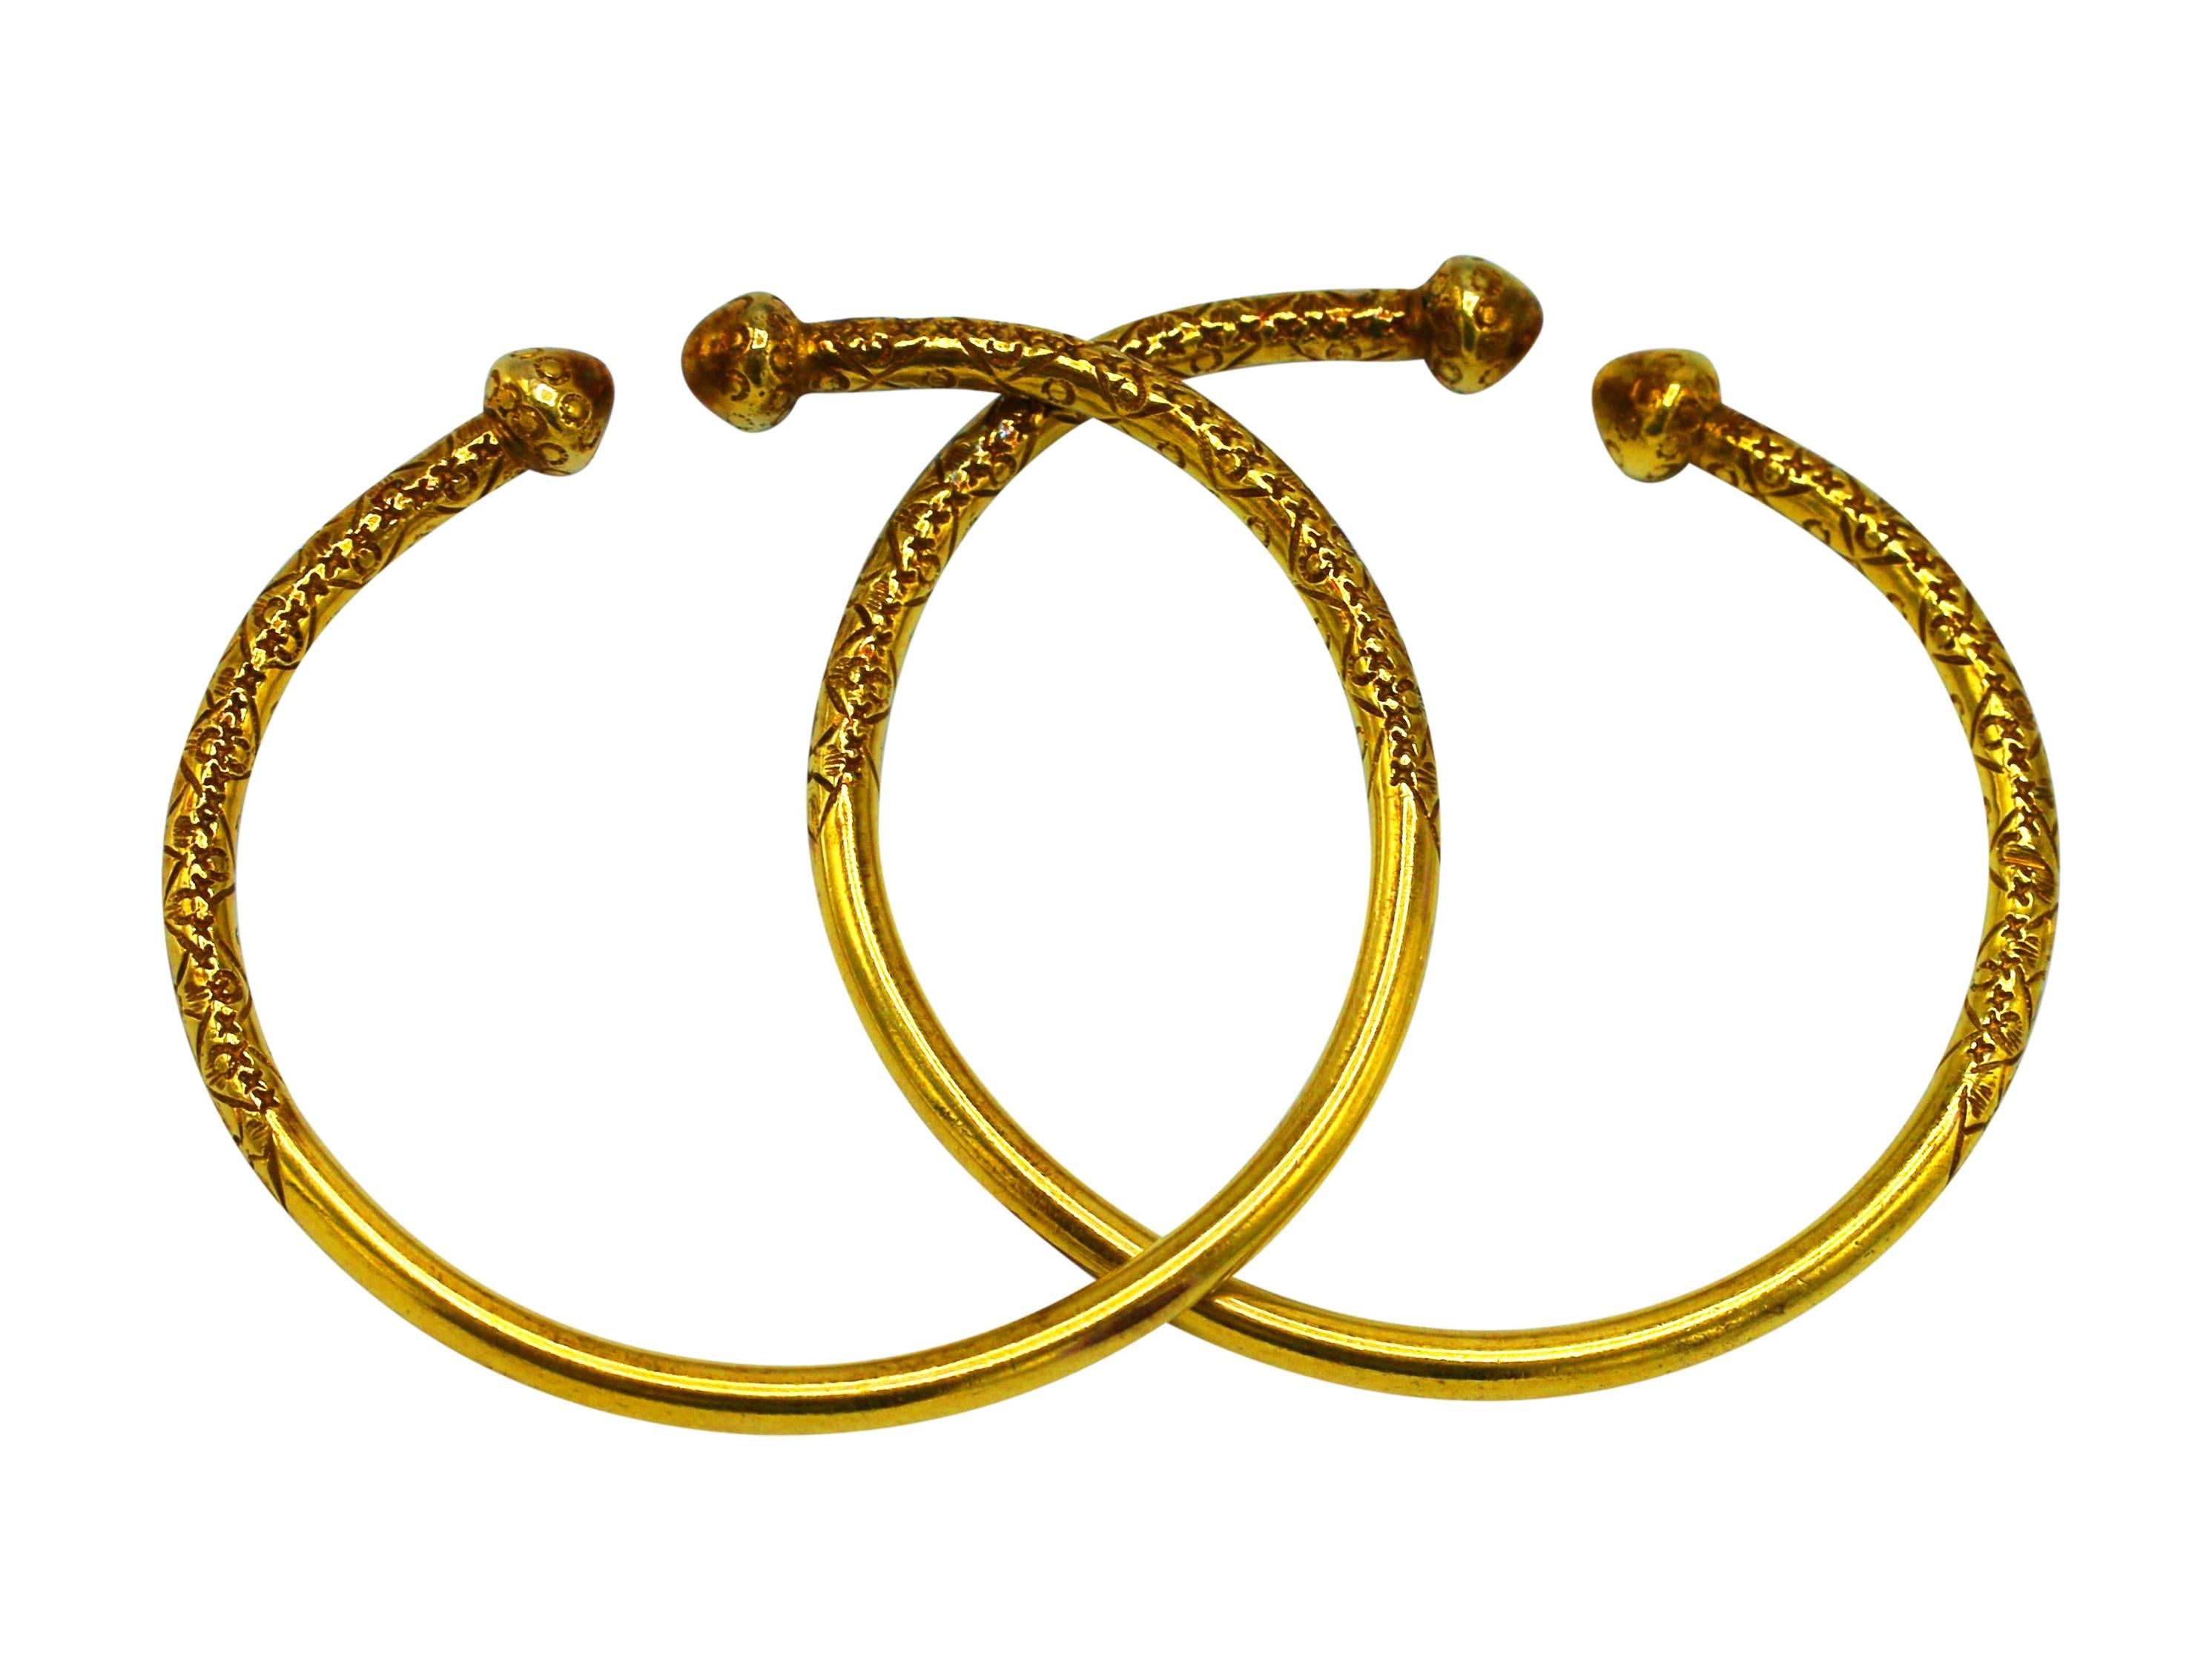 The 18 karat yellow gold bangles with carved ornate patterns, gross weight 58.4 grams, length 7 inches, width 1/4 inch, beautiful on the wrist to wear together or stacked with several other bracelets.